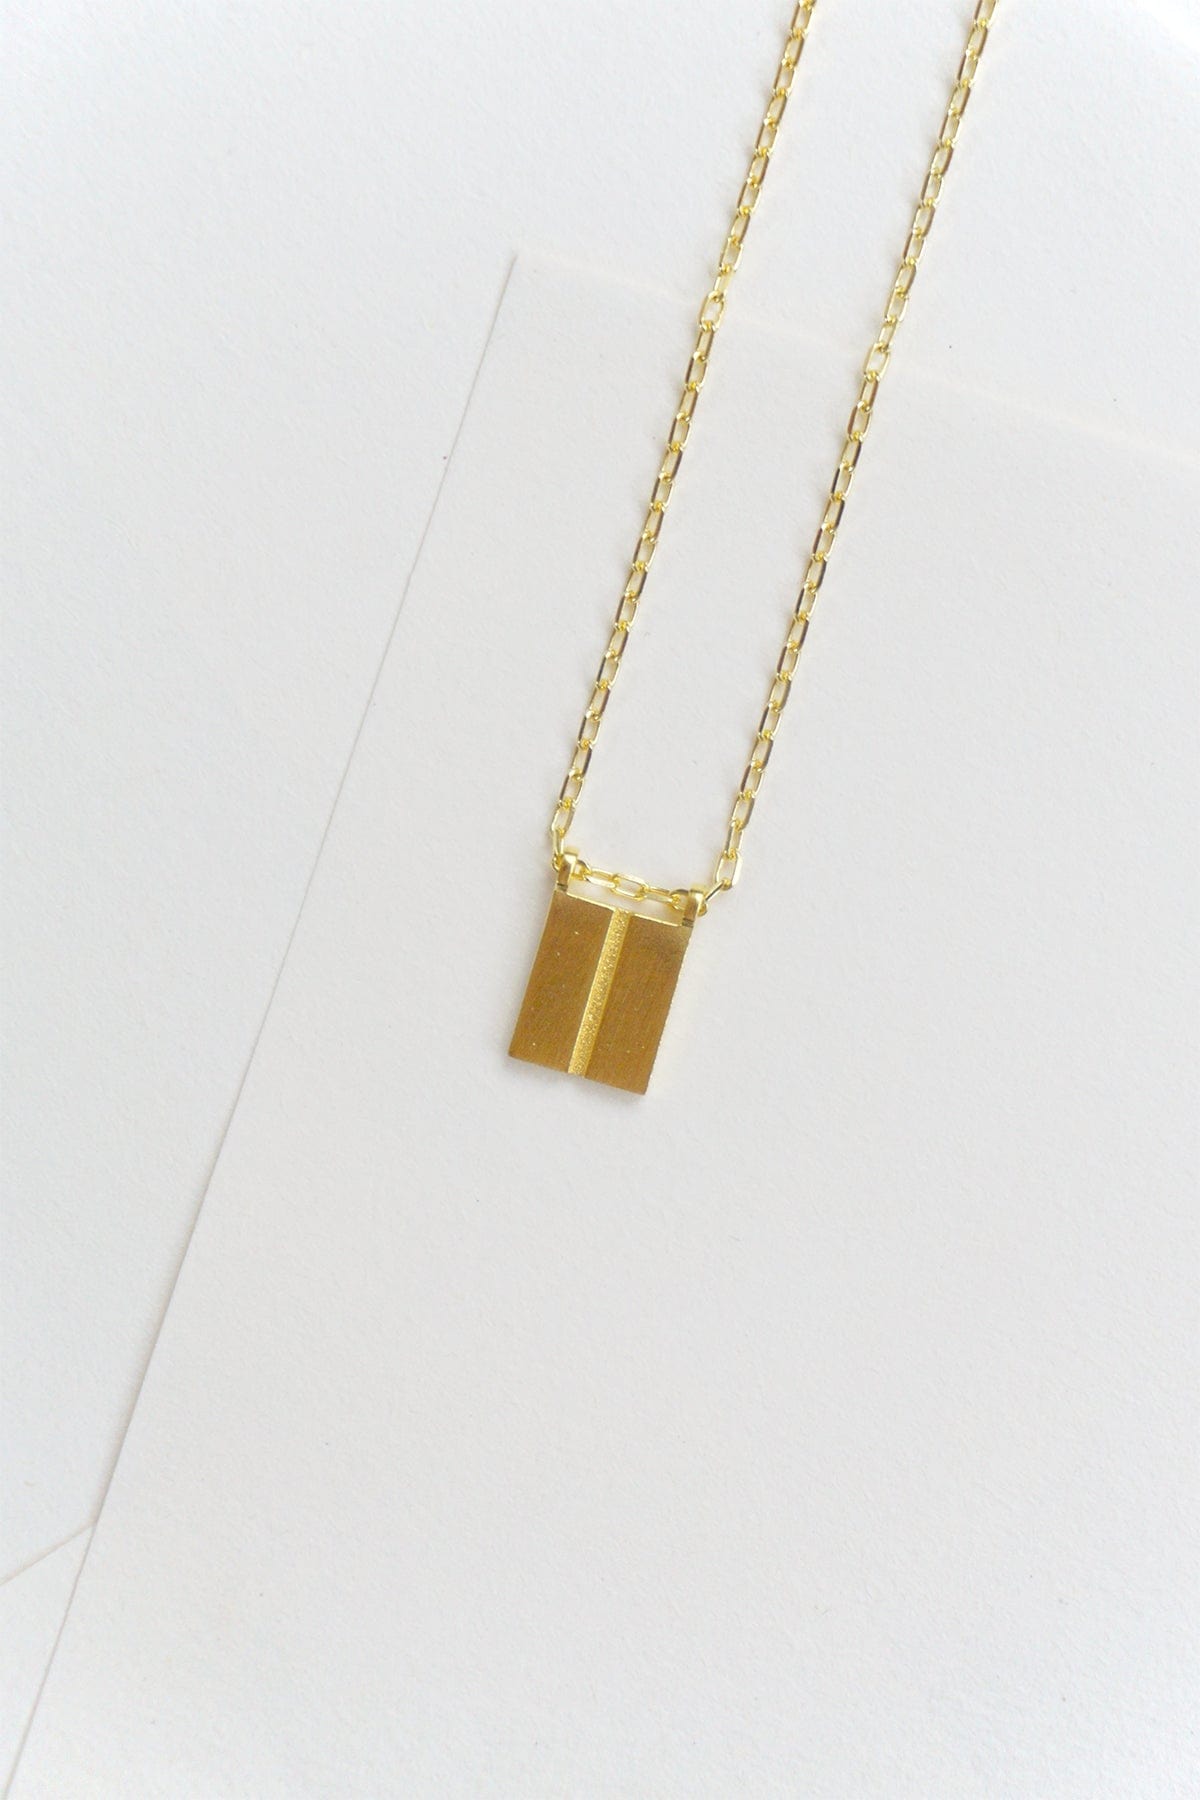 Initial Necklace - Gold Plated Gold / I AR.M ANNA ROSA MOSCHOUTI